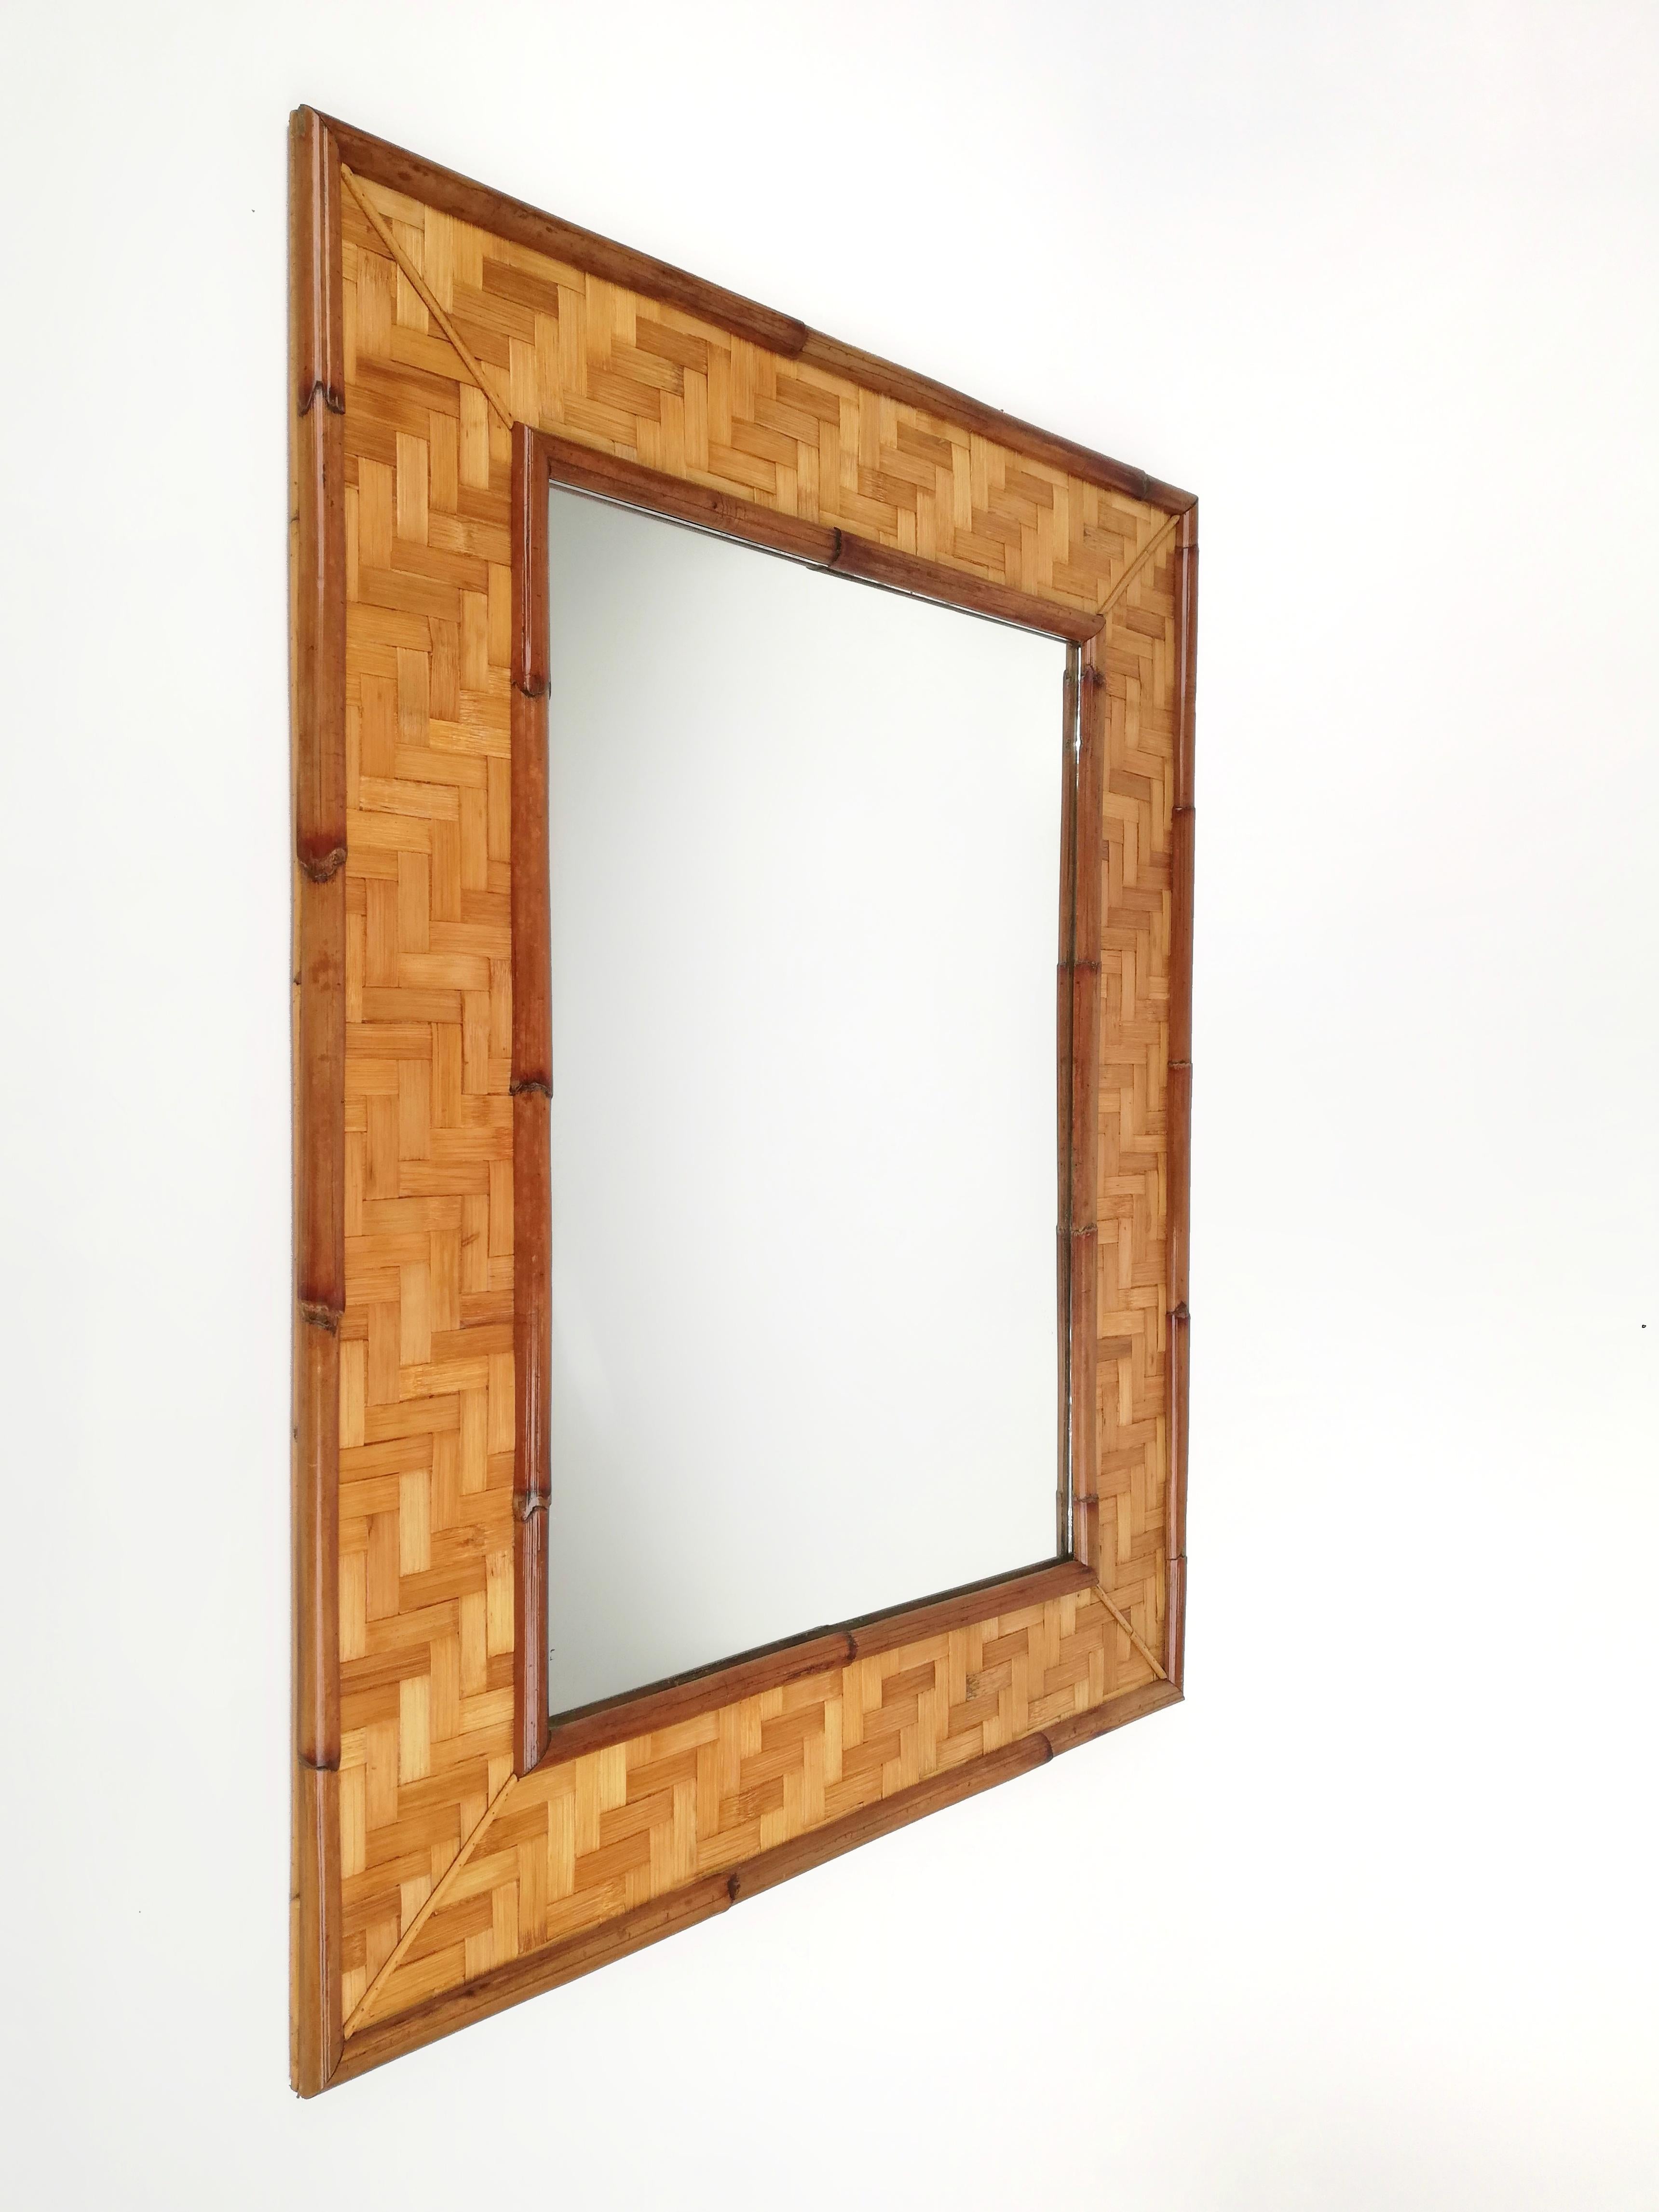 Very Large Vintage Mirror in Bamboo Cane and Rattan Parquets, Italy 1970s For Sale 7